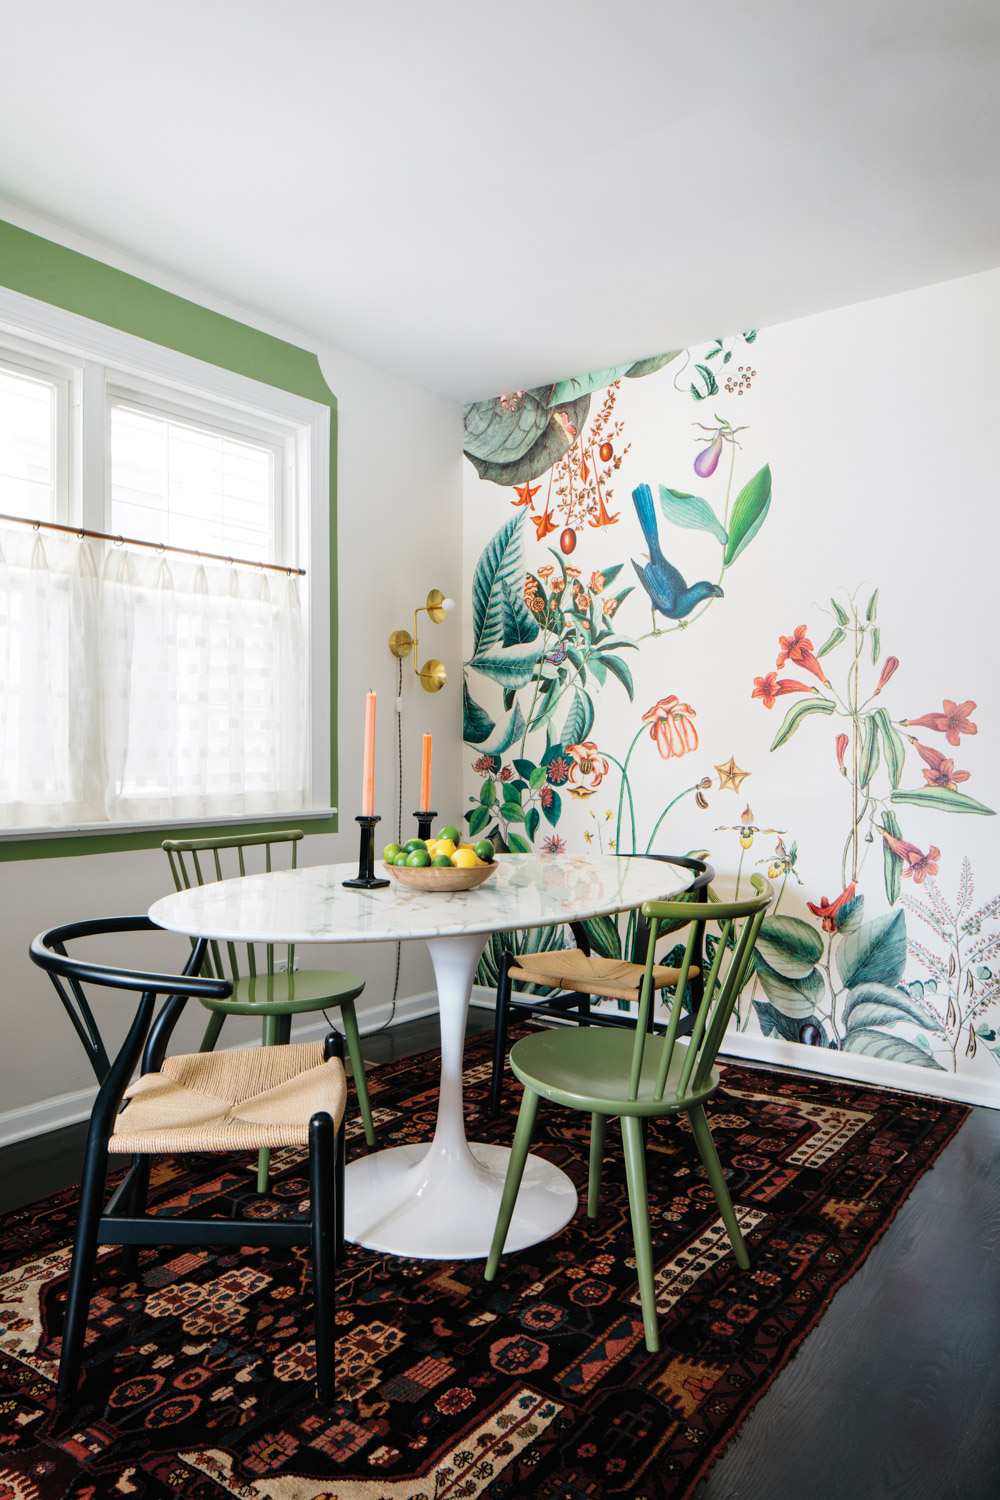 Dining area with white table, green and black chairs and a tropical-print wallcovering.